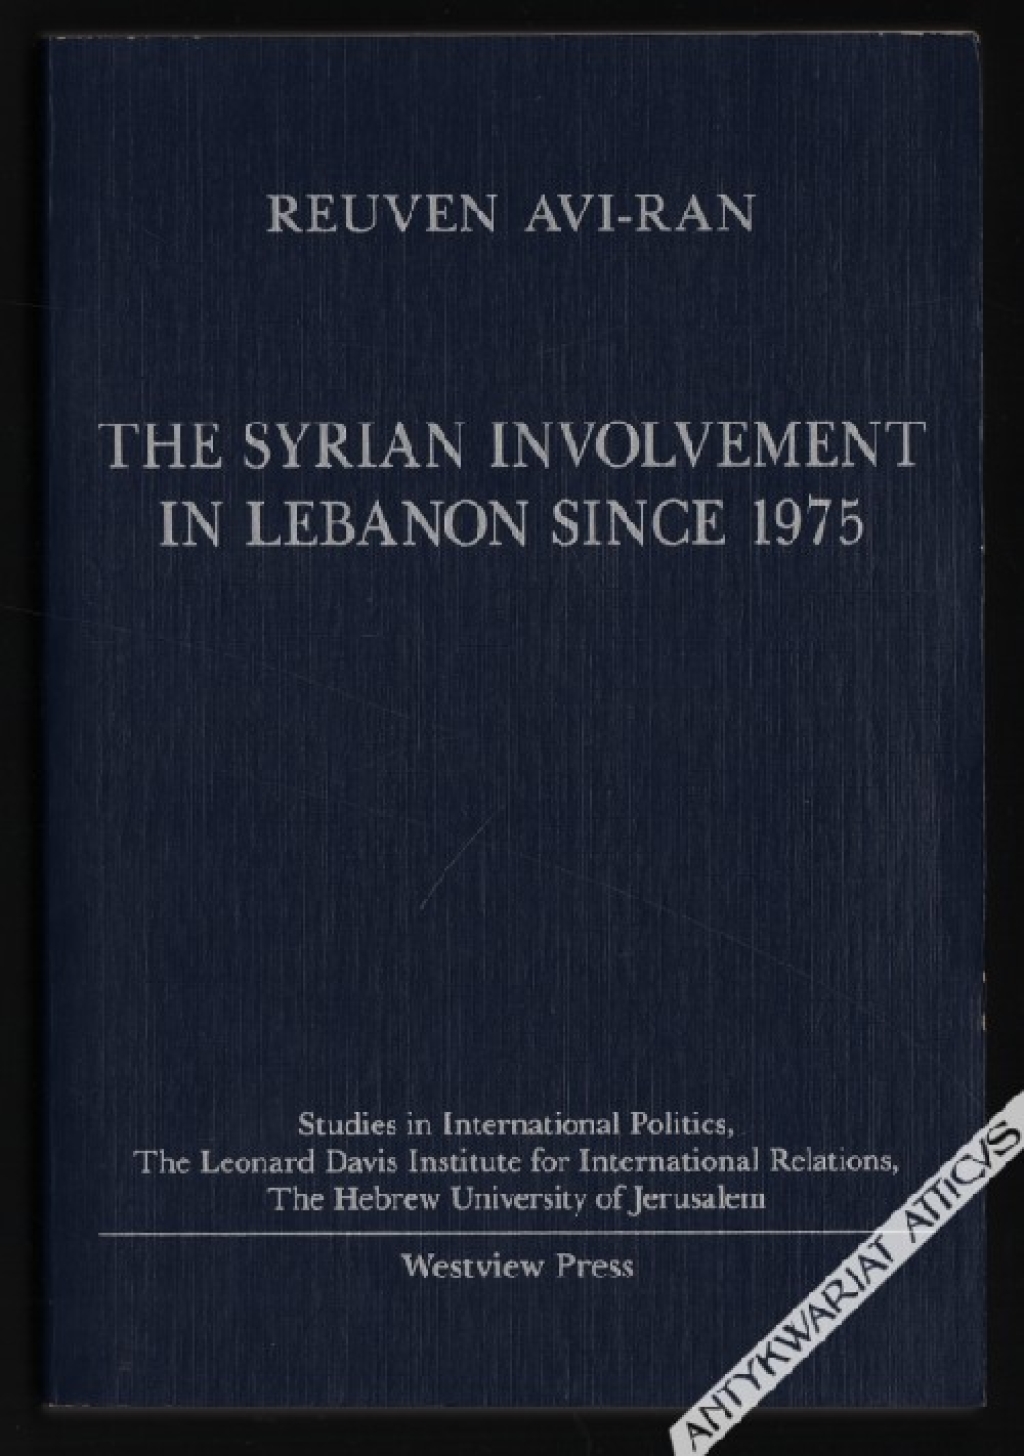 The Syrian Involvement in Lebanon since 1975